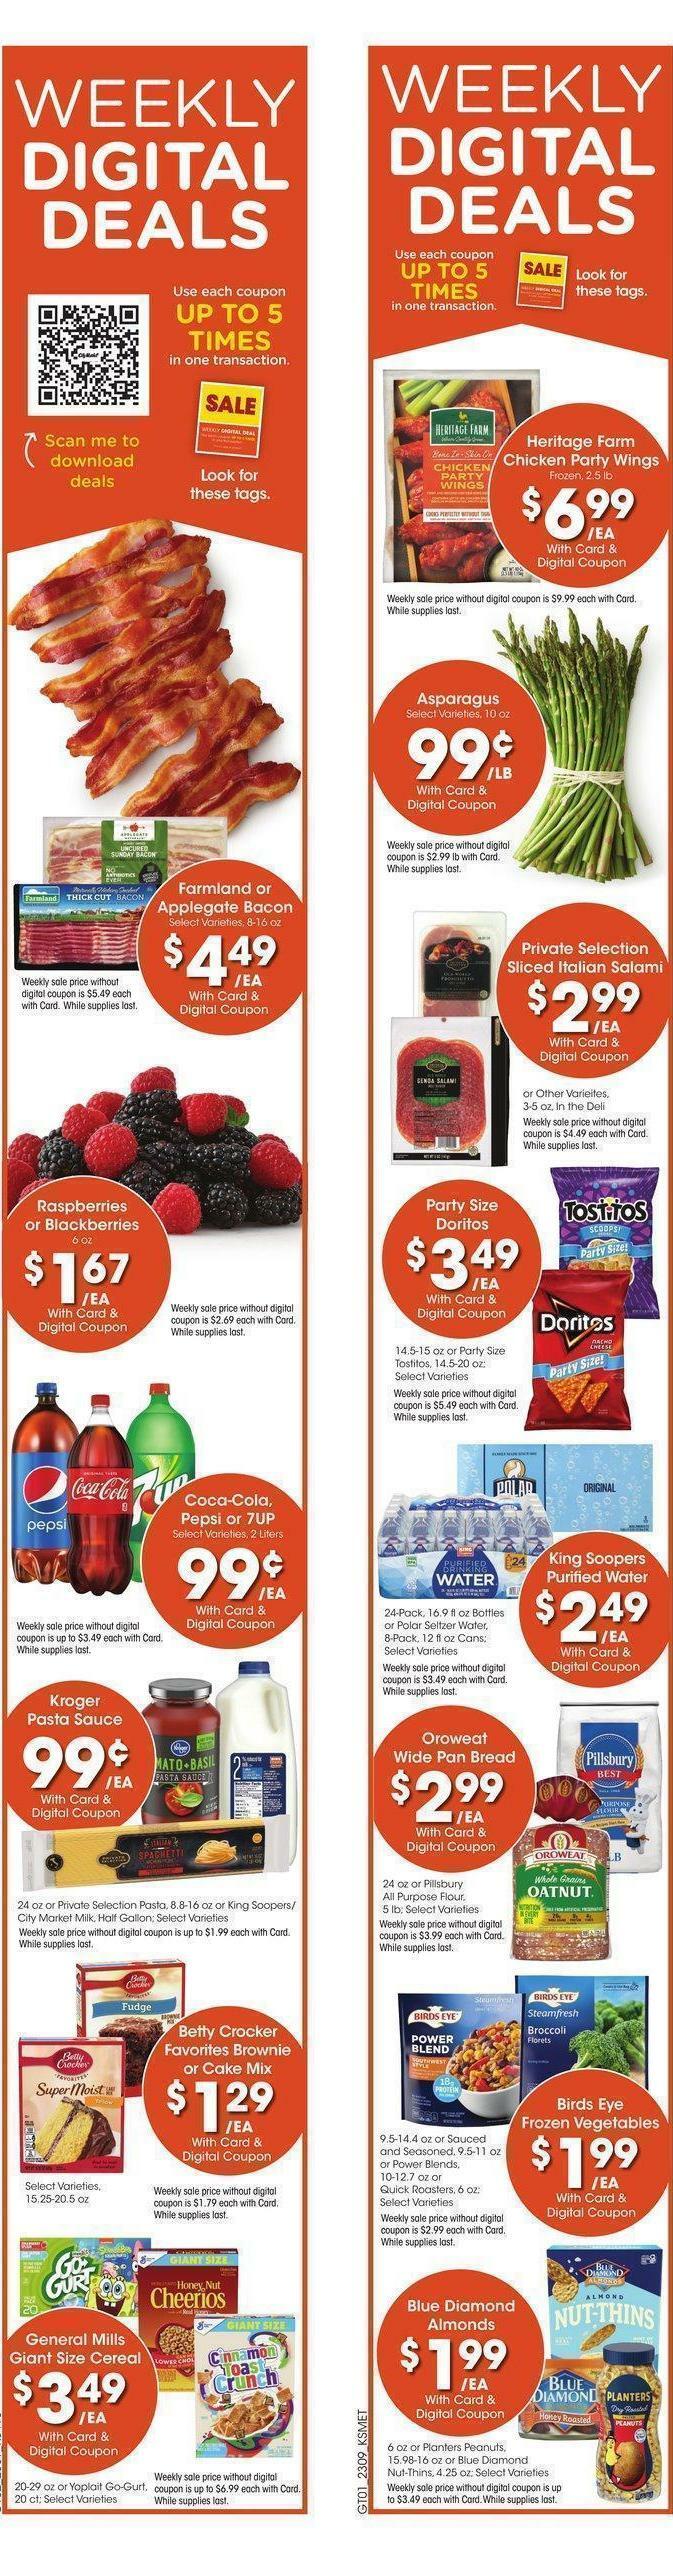 City Market Weekly Ad from March 29